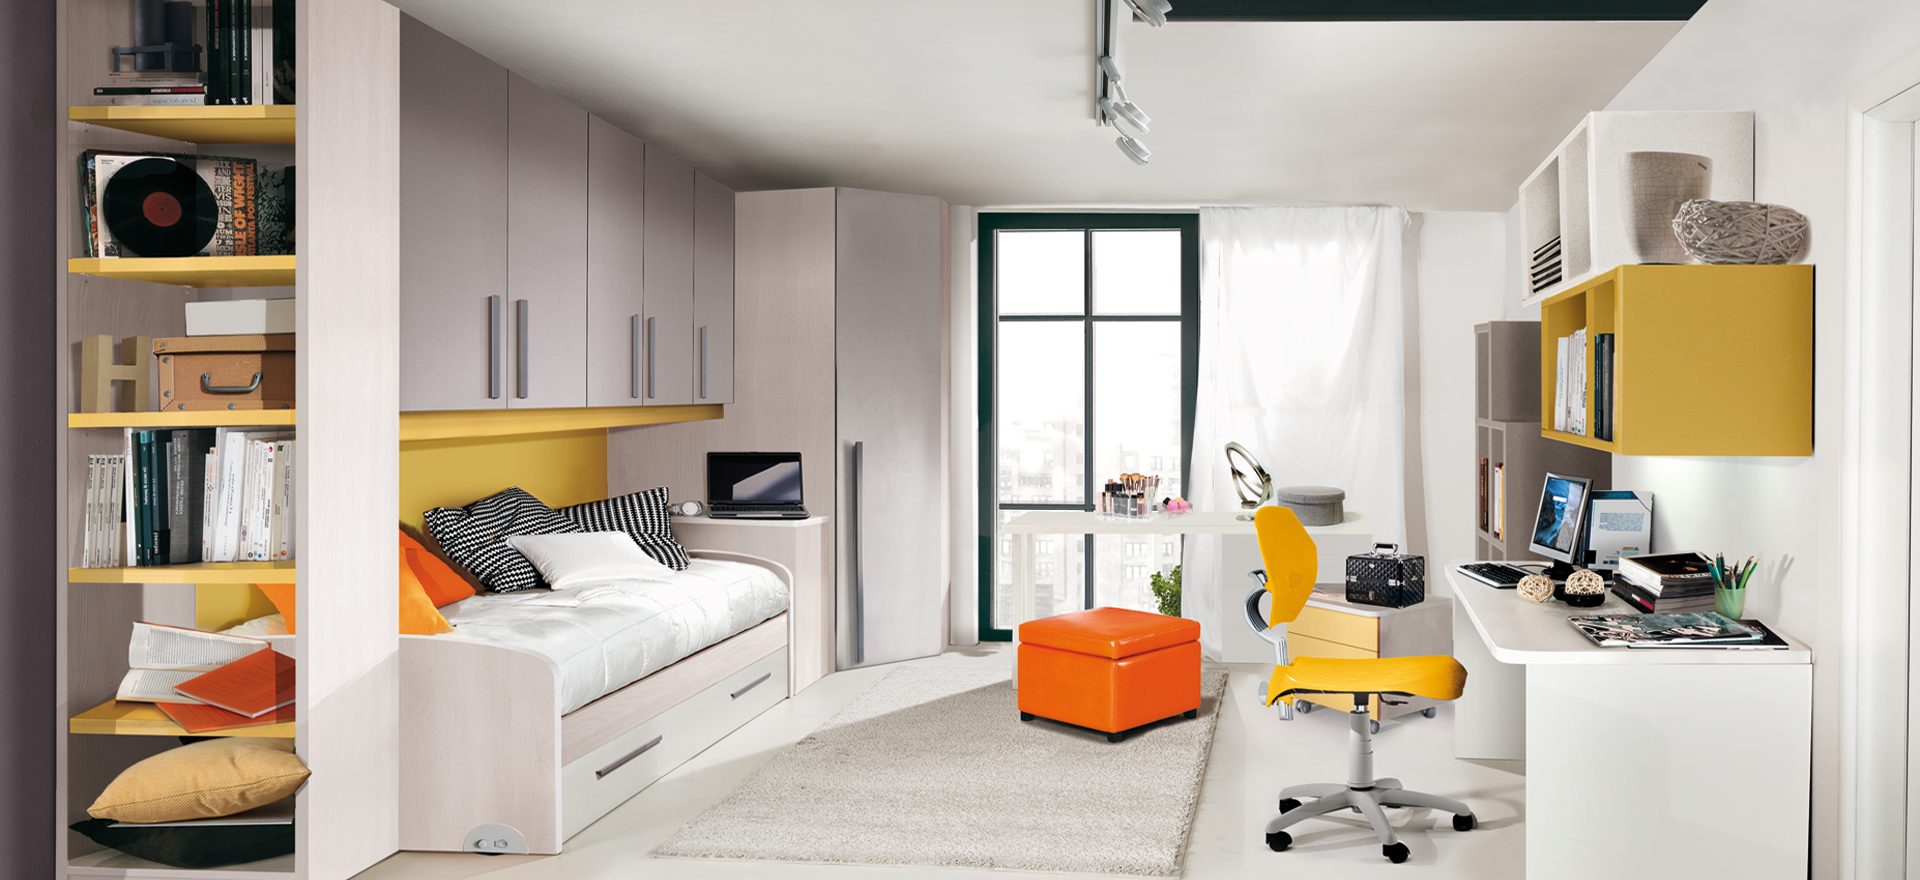 bedroom-furniture-young-olmo-sbiancato-yellow-grey